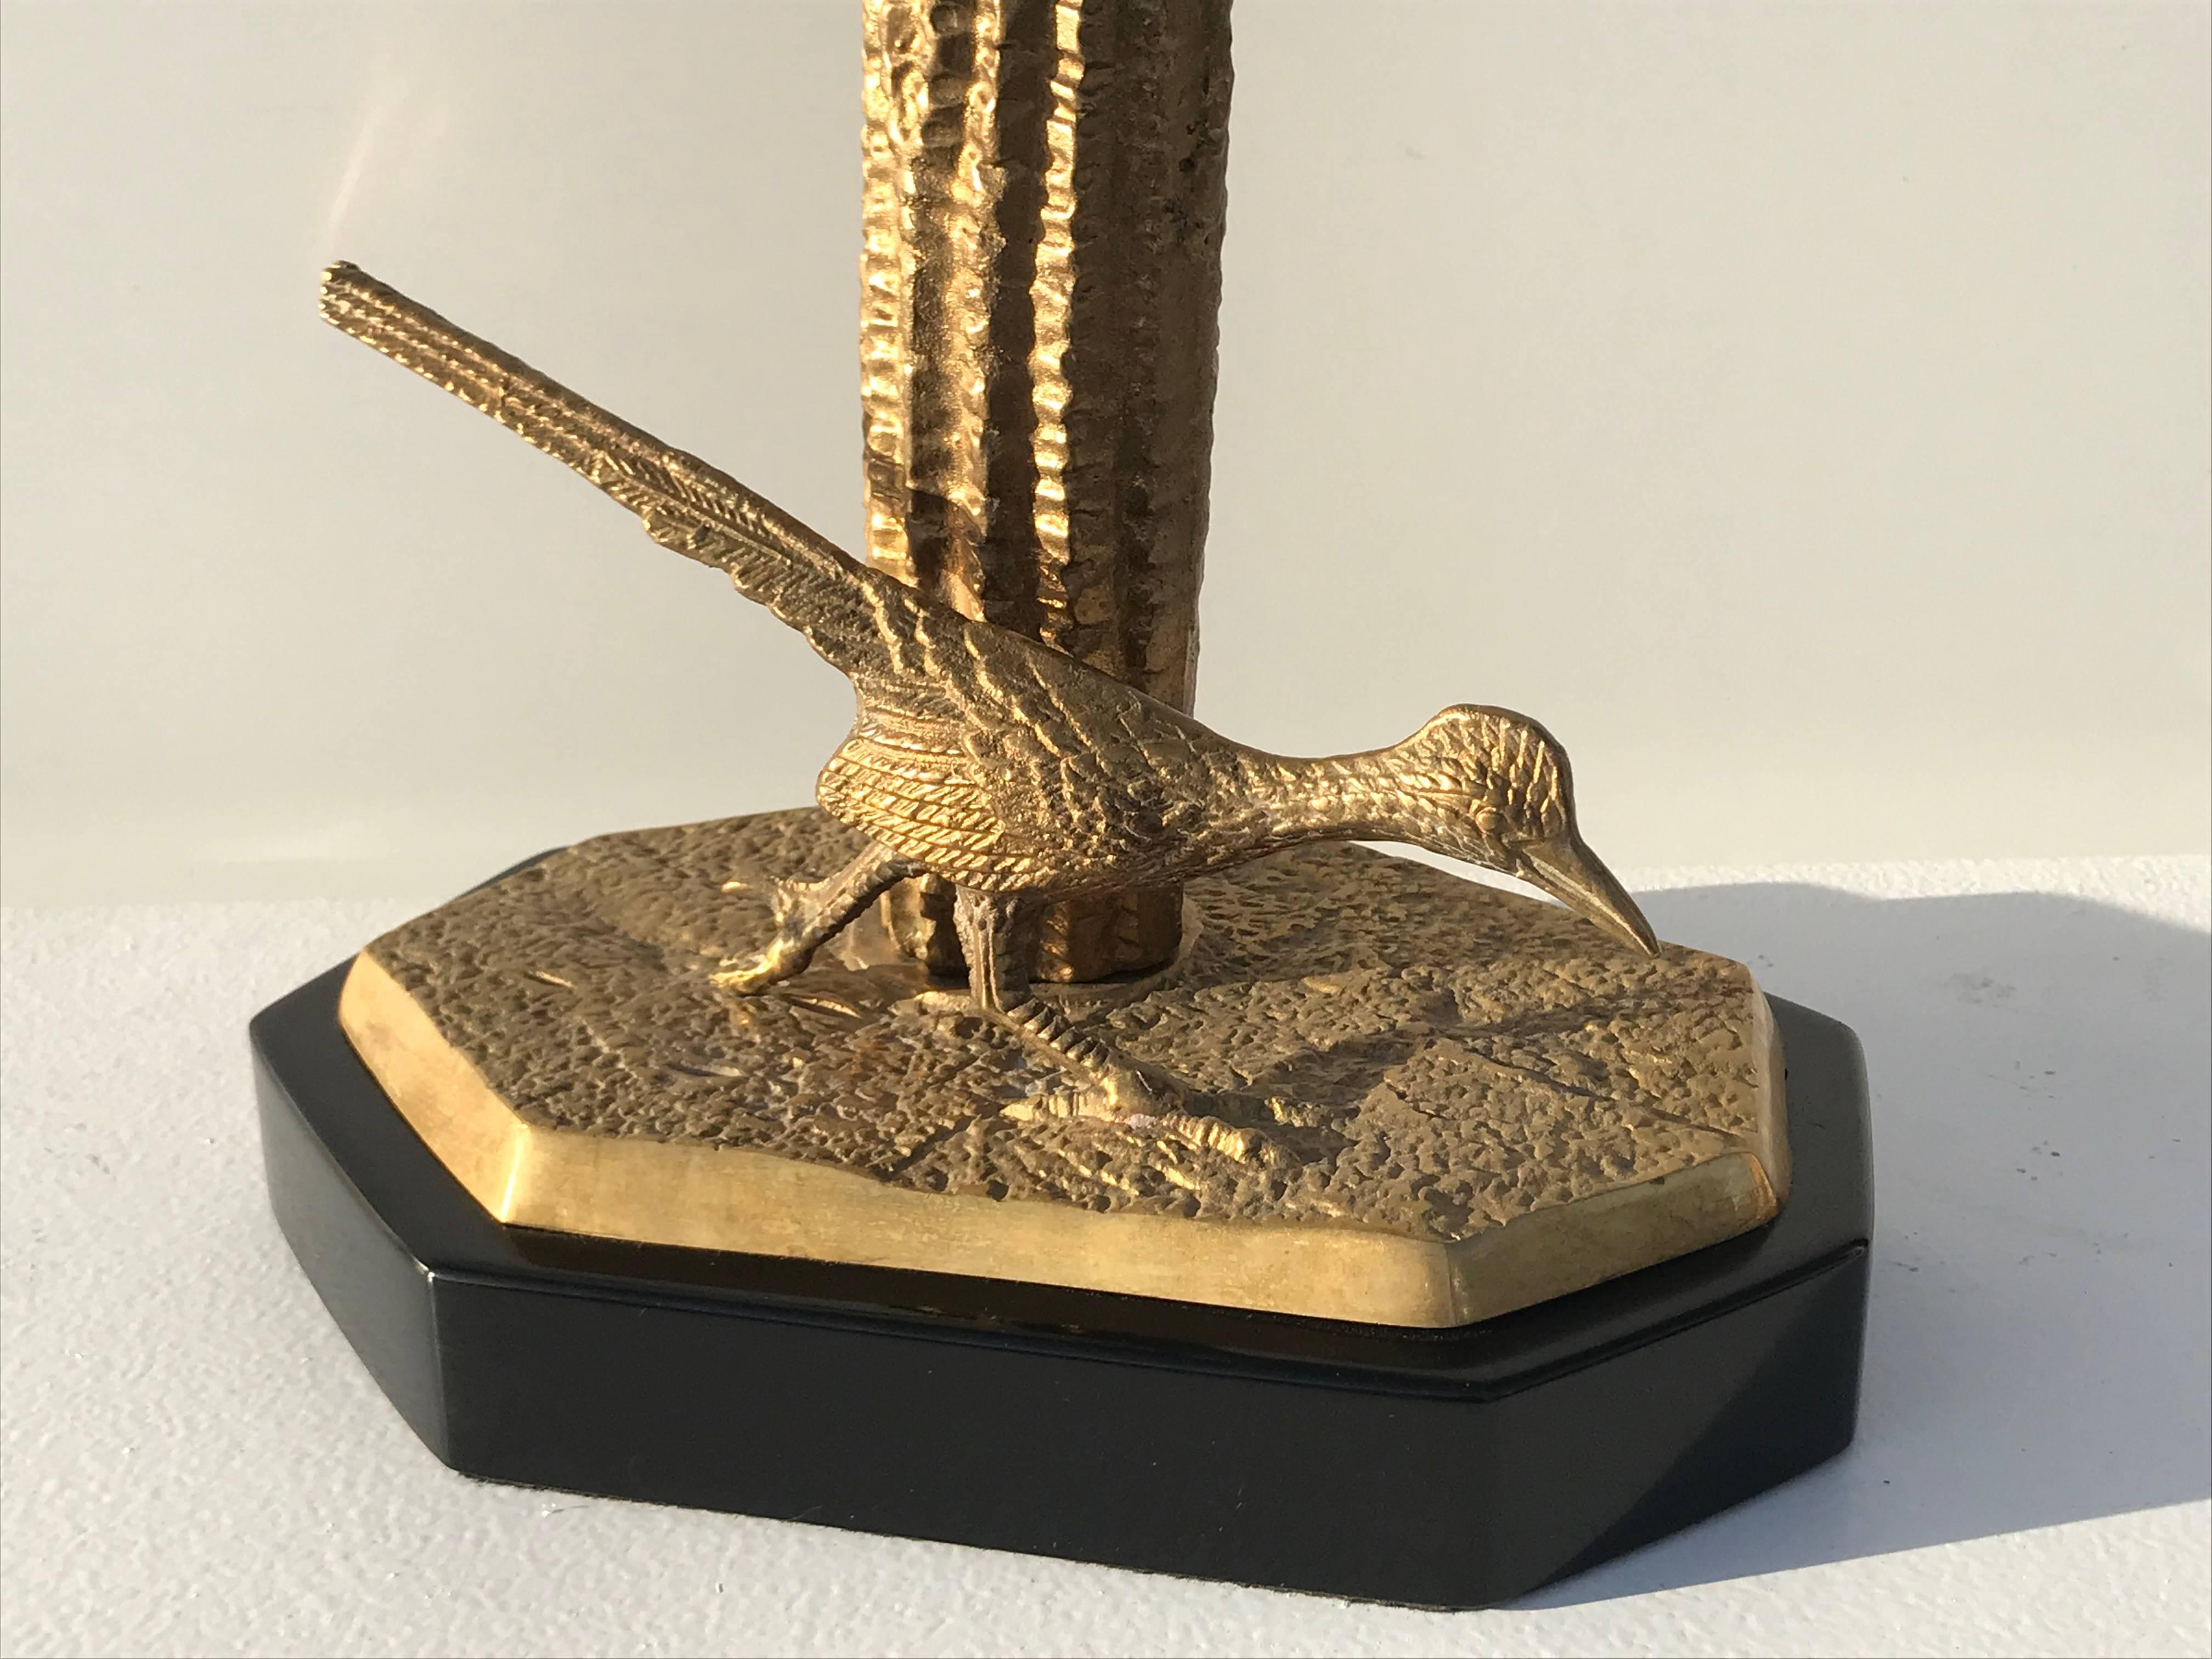 Brass Saguaro cactus sculpture with roadrunner. Top has a hole so it can be converted into a lamp if desired just like our pair of cactus lamps 1stdibs reference number LU98505994453.

Offered at Gallery Girasole